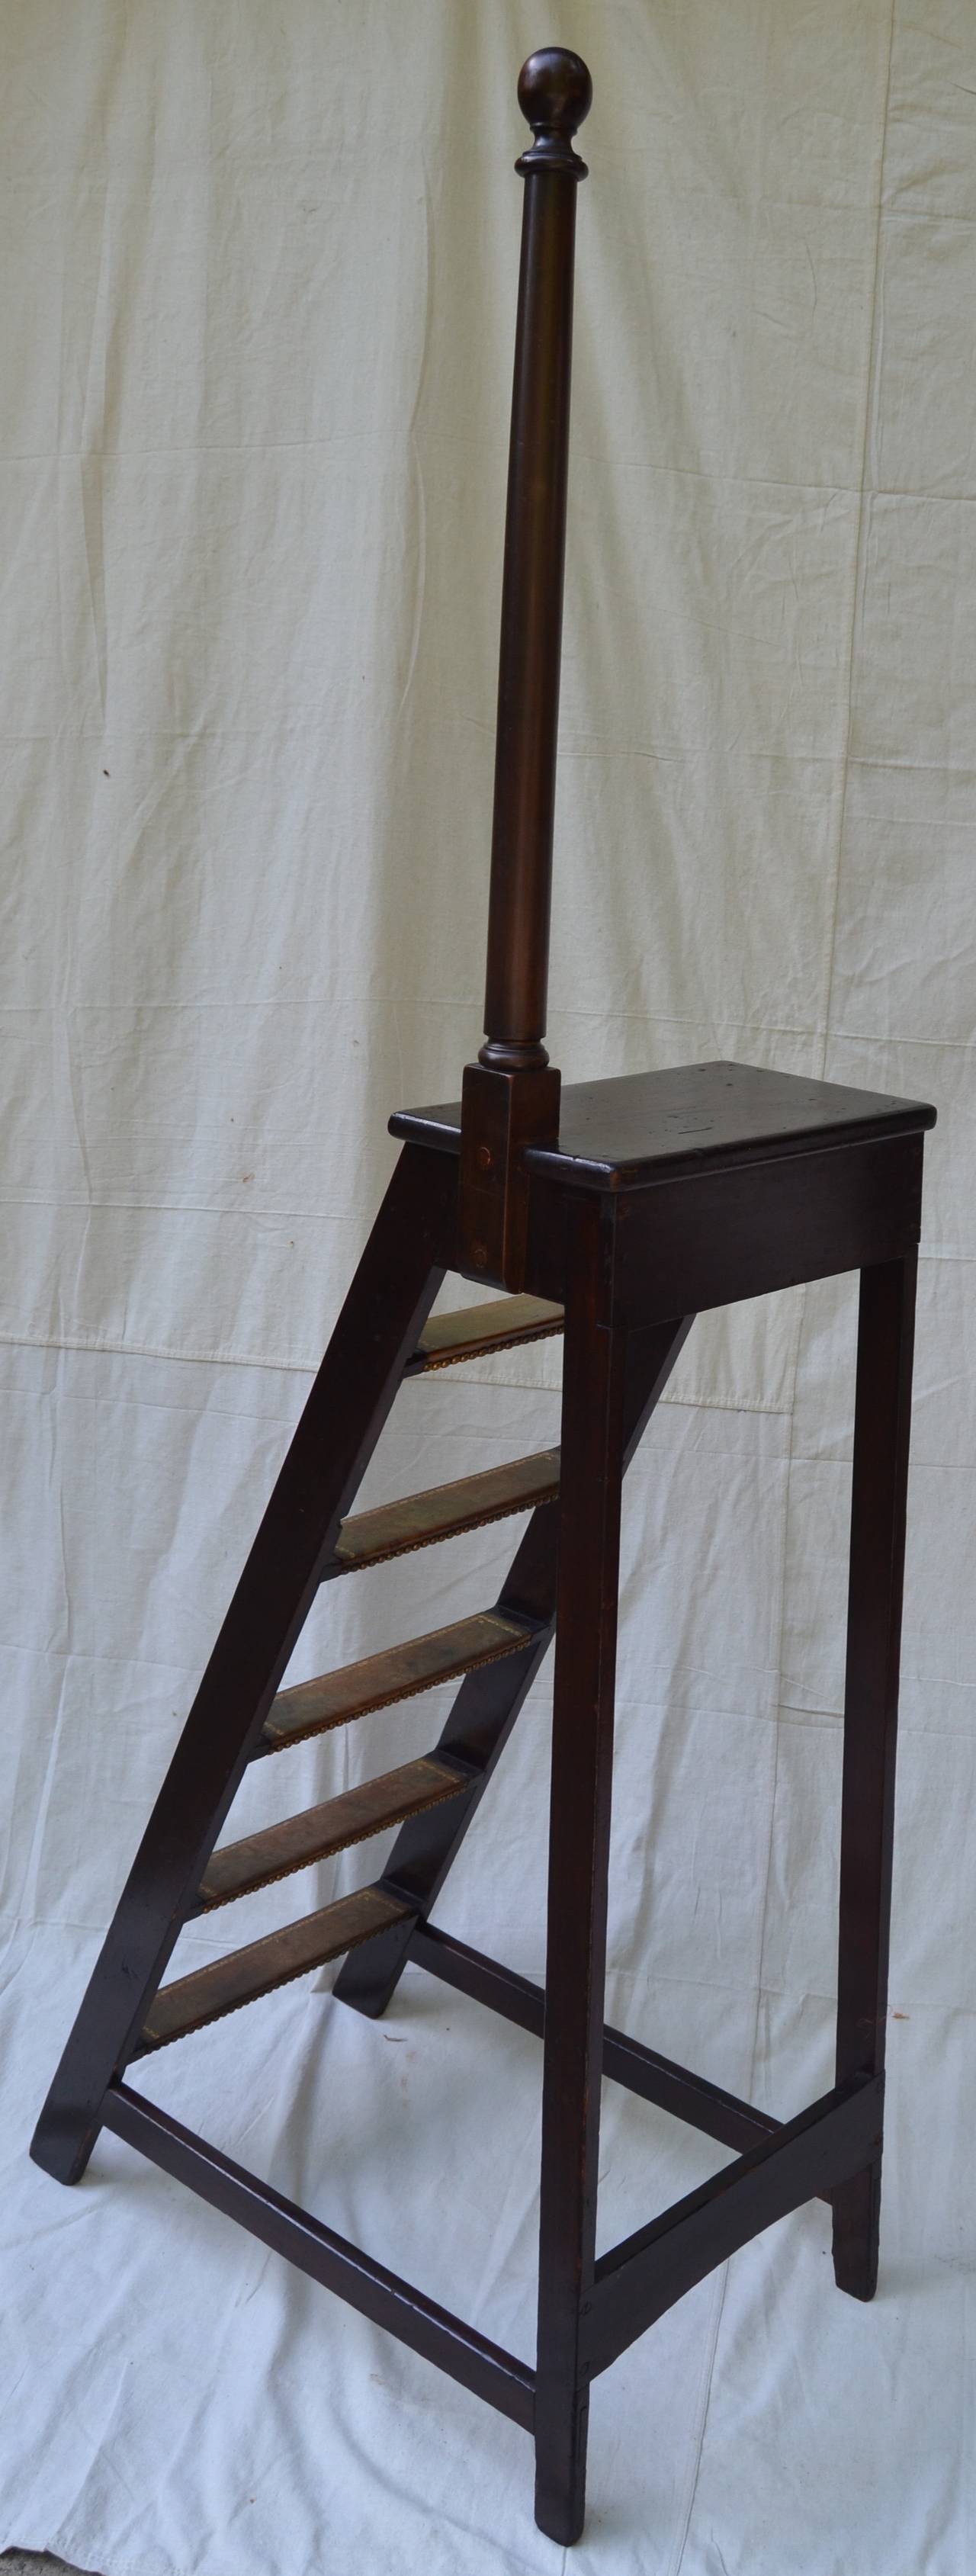 tall stained pine and leather library ladder, height of ladder is 48 in. overall height is 76 in. Light weight with sturdy mortised and pin construction, brass tacks add a handsome detail.